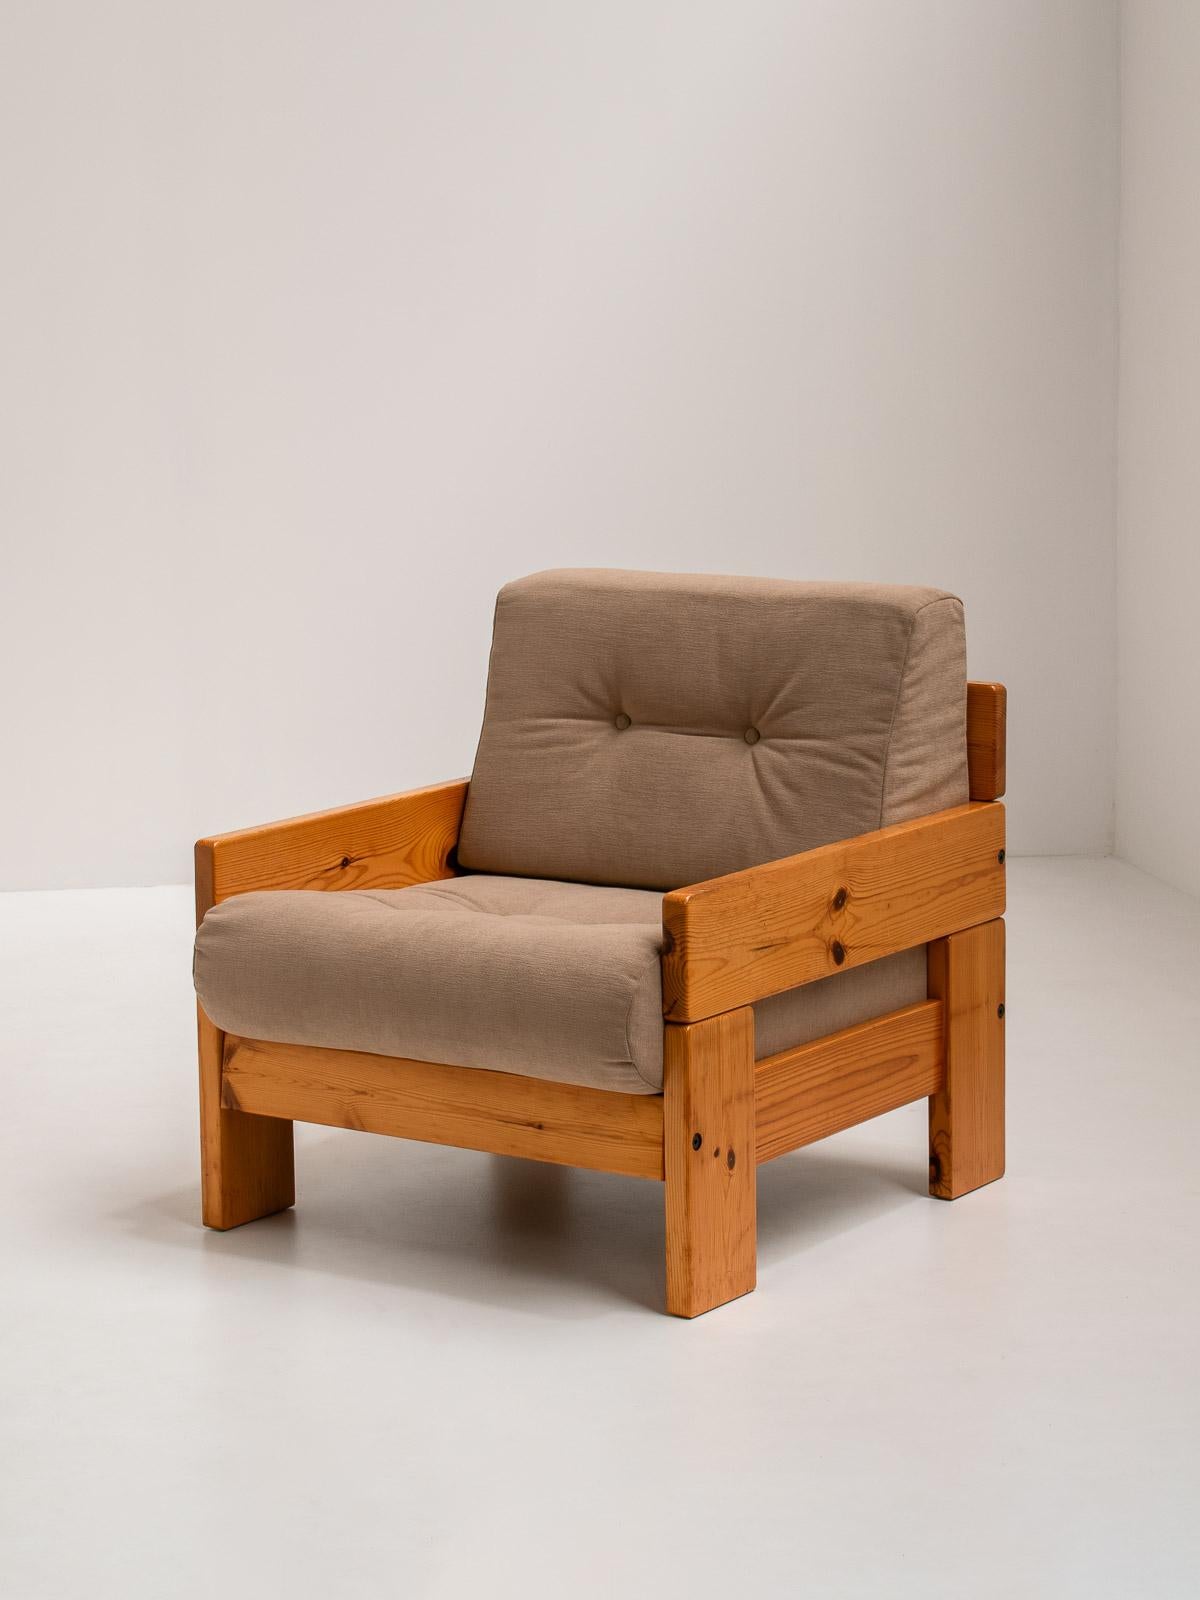 Pair of Minimalist Pine Lounge Chairs, Italy, 1970s In Good Condition For Sale In Antwerp, BE